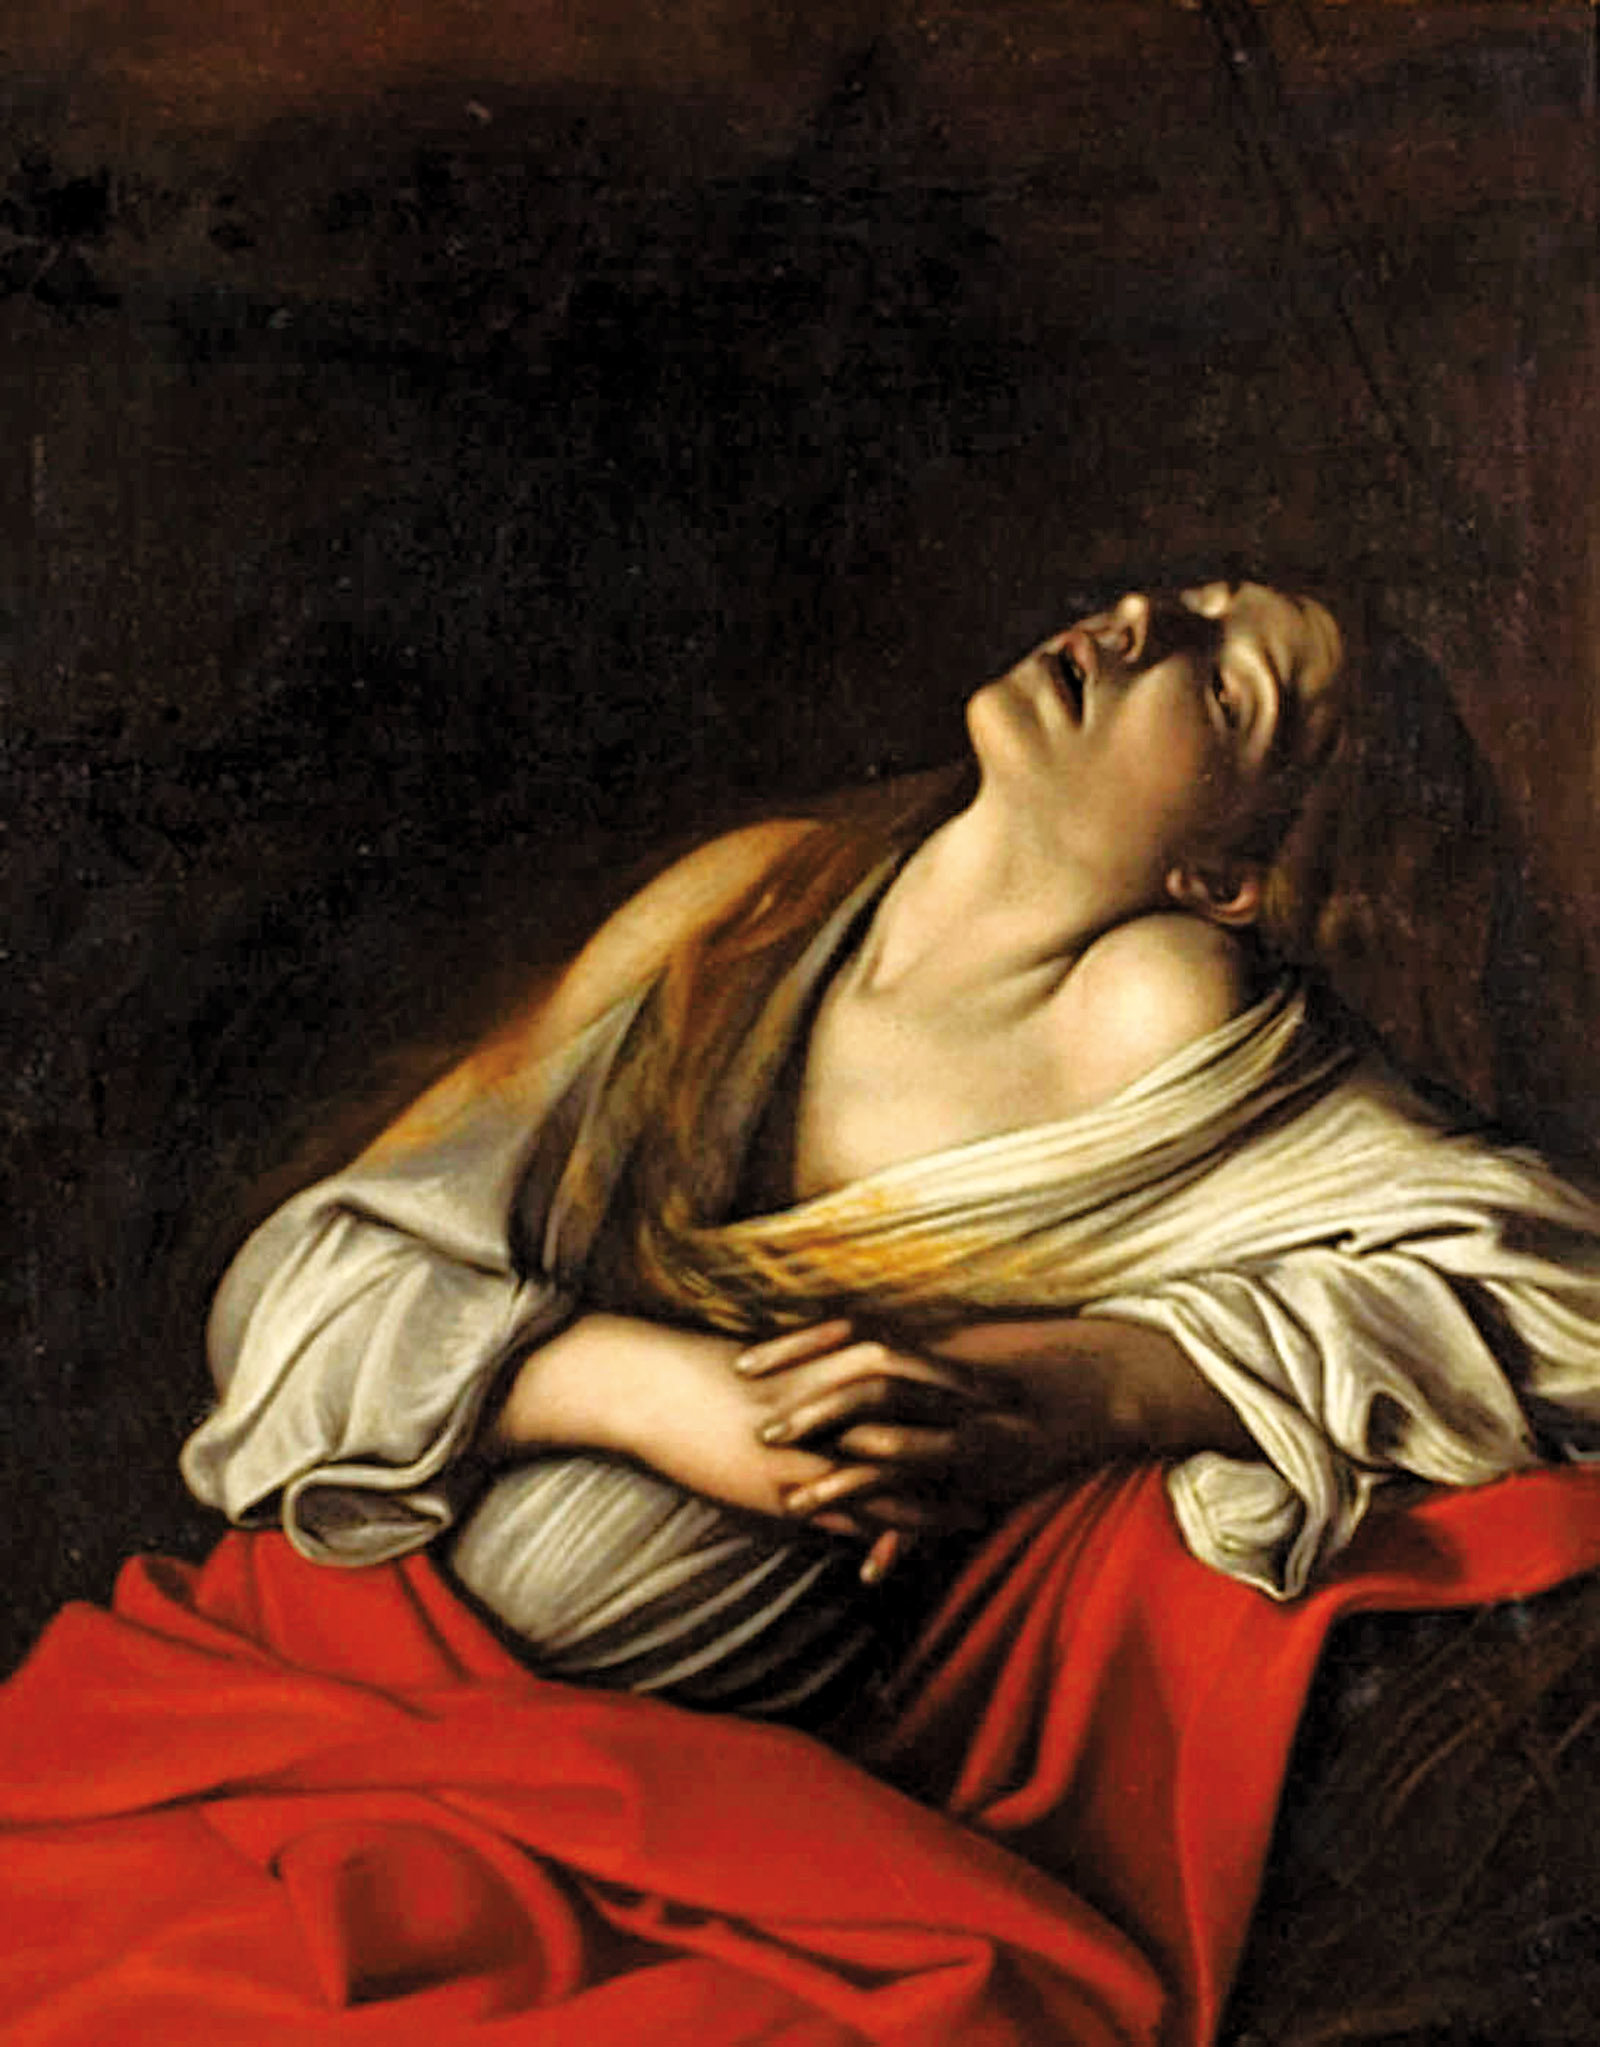 Caravaggio's painting, Mary Magdalene in Ecstasy, 1606